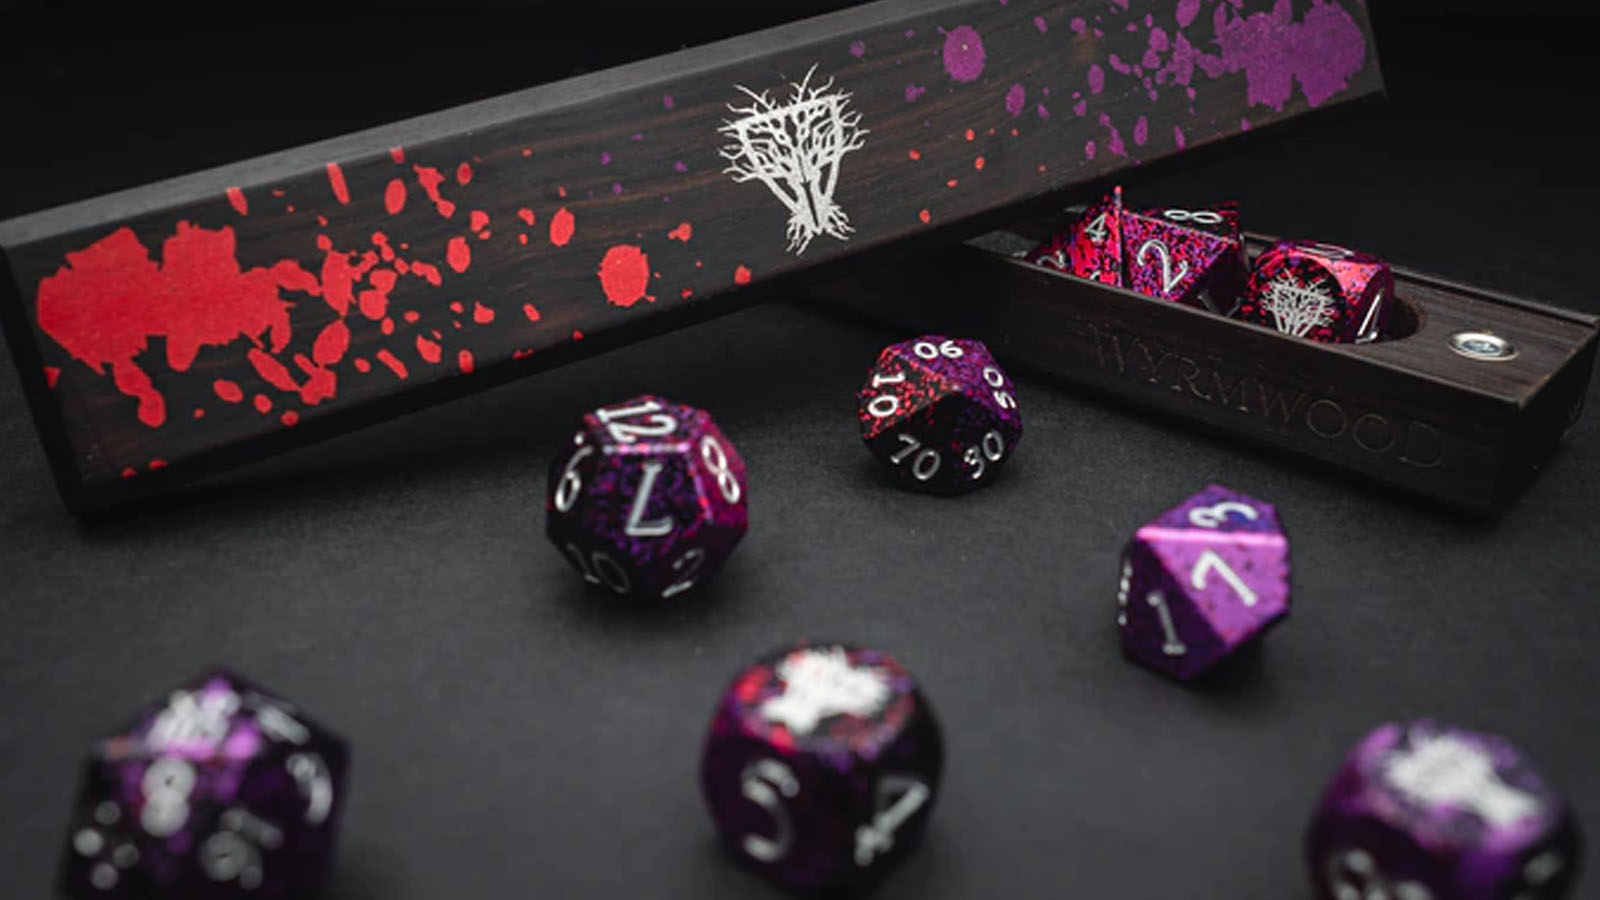 Roll beautiful crits like never before with the new dice from Wyrmwood